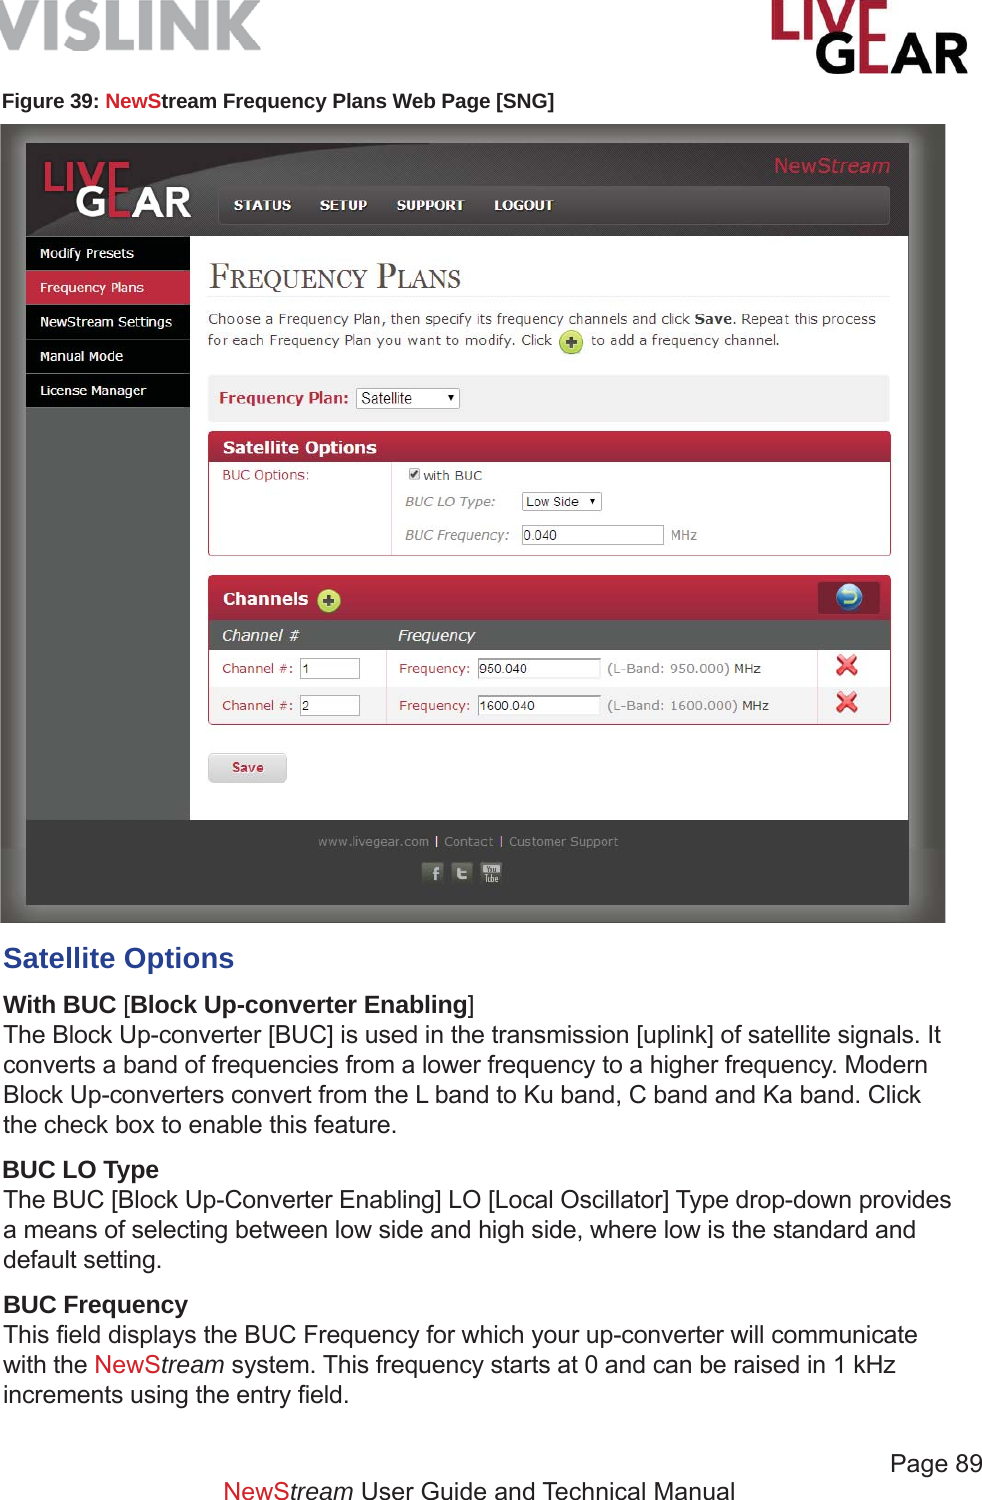             Page 89   NewStream User Guide and Technical ManualFigure 39: NewStream Frequency Plans Web Page [SNG]Satellite OptionsWith BUC [Block Up-converter Enabling]The Block Up-converter [BUC] is used in the transmission [uplink] of satellite signals. It converts a band of frequencies from a lower frequency to a higher frequency. Modern Block Up-converters convert from the L band to Ku band, C band and Ka band. Click the check box to enable this feature.BUC LO TypeThe BUC [Block Up-Converter Enabling] LO [Local Oscillator] Type drop-down provides a means of selecting between low side and high side, where low is the standard and default setting.BUC FrequencyThis ﬁ eld displays the BUC Frequency for which your up-converter will communicate with the NewStream system. This frequency starts at 0 and can be raised in 1 kHz increments using the entry ﬁ eld.